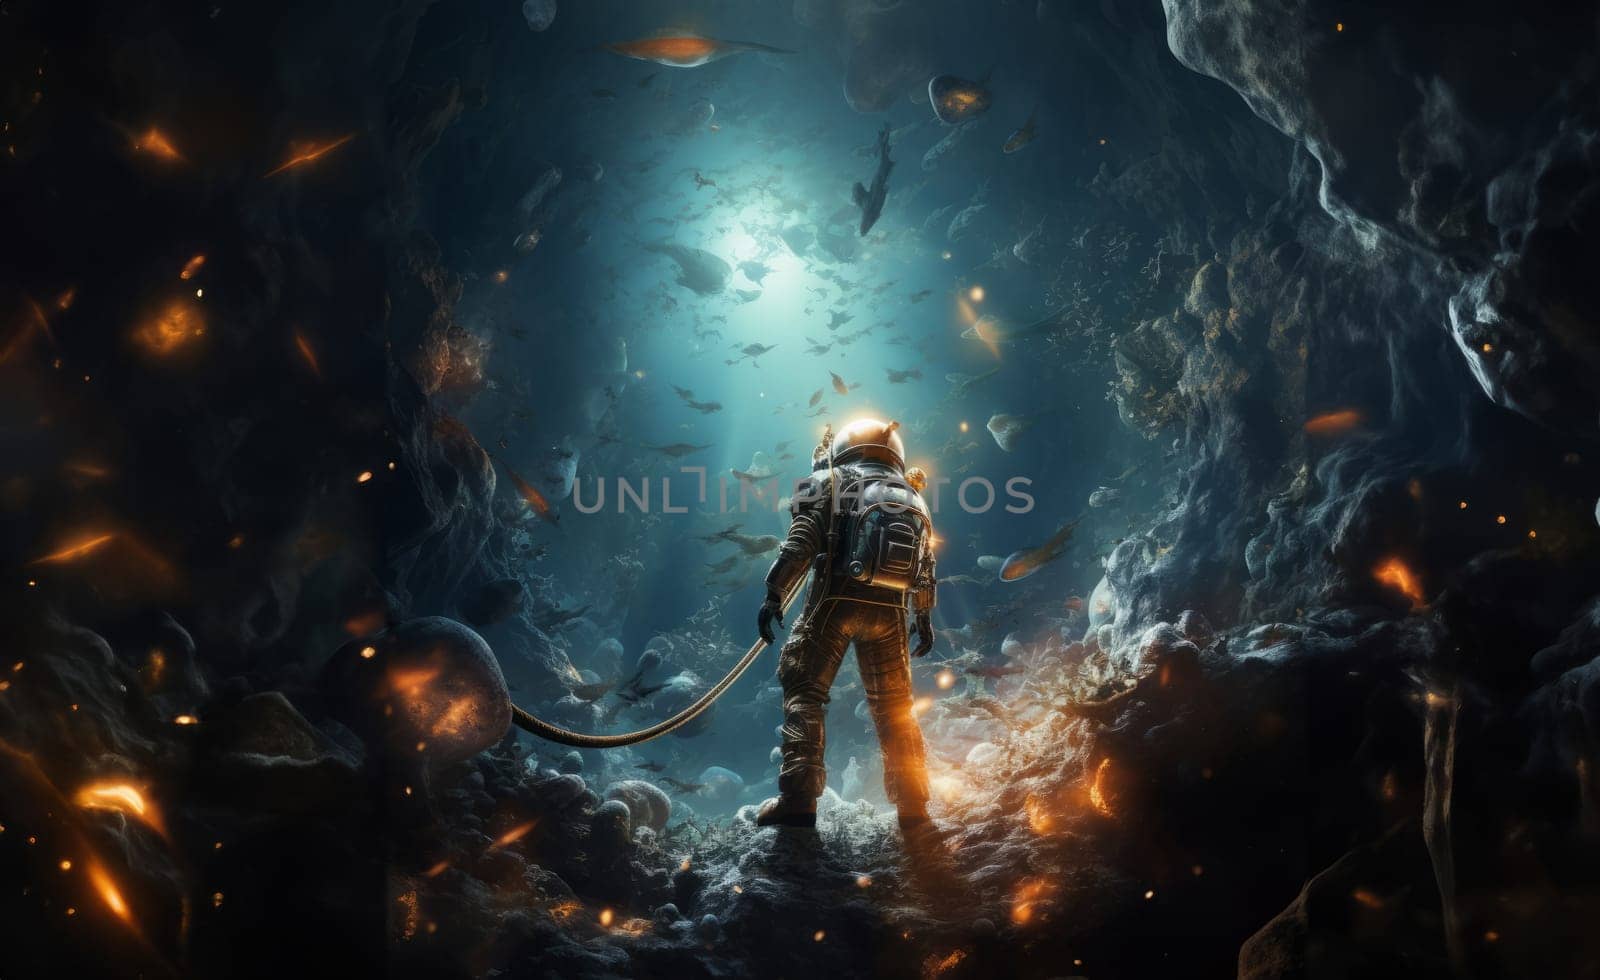 an astronaut and their team exploring mysterious and adventurous locations in space, embarking on a cosmic journey to uncover the wonders and mysteries of the universe.Generated image.